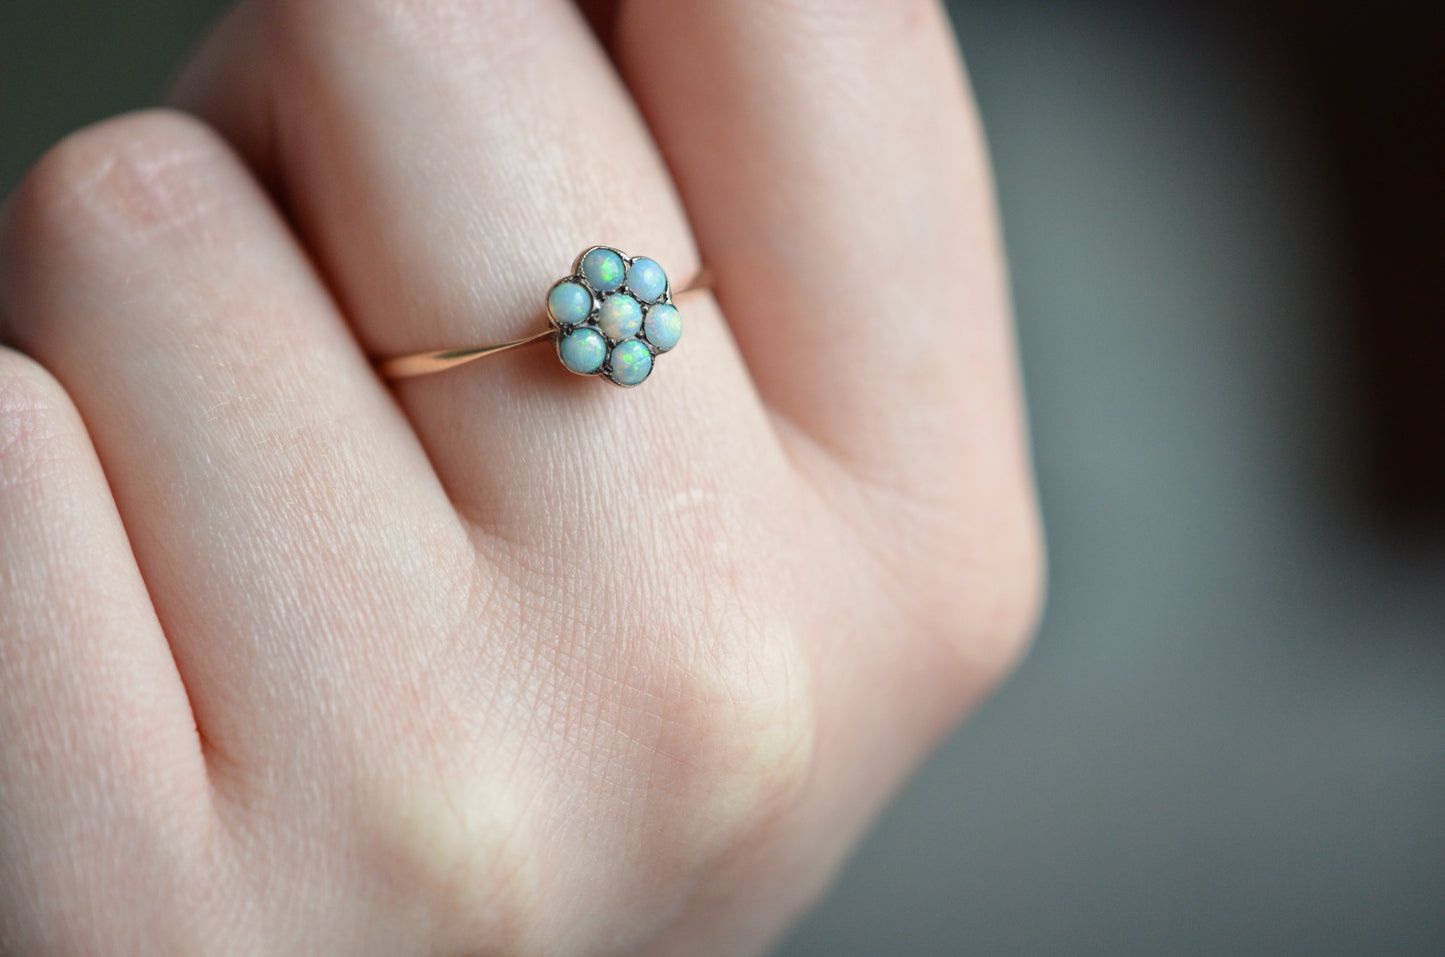 Soft and Delicate Victorian Opal Daisy Ring